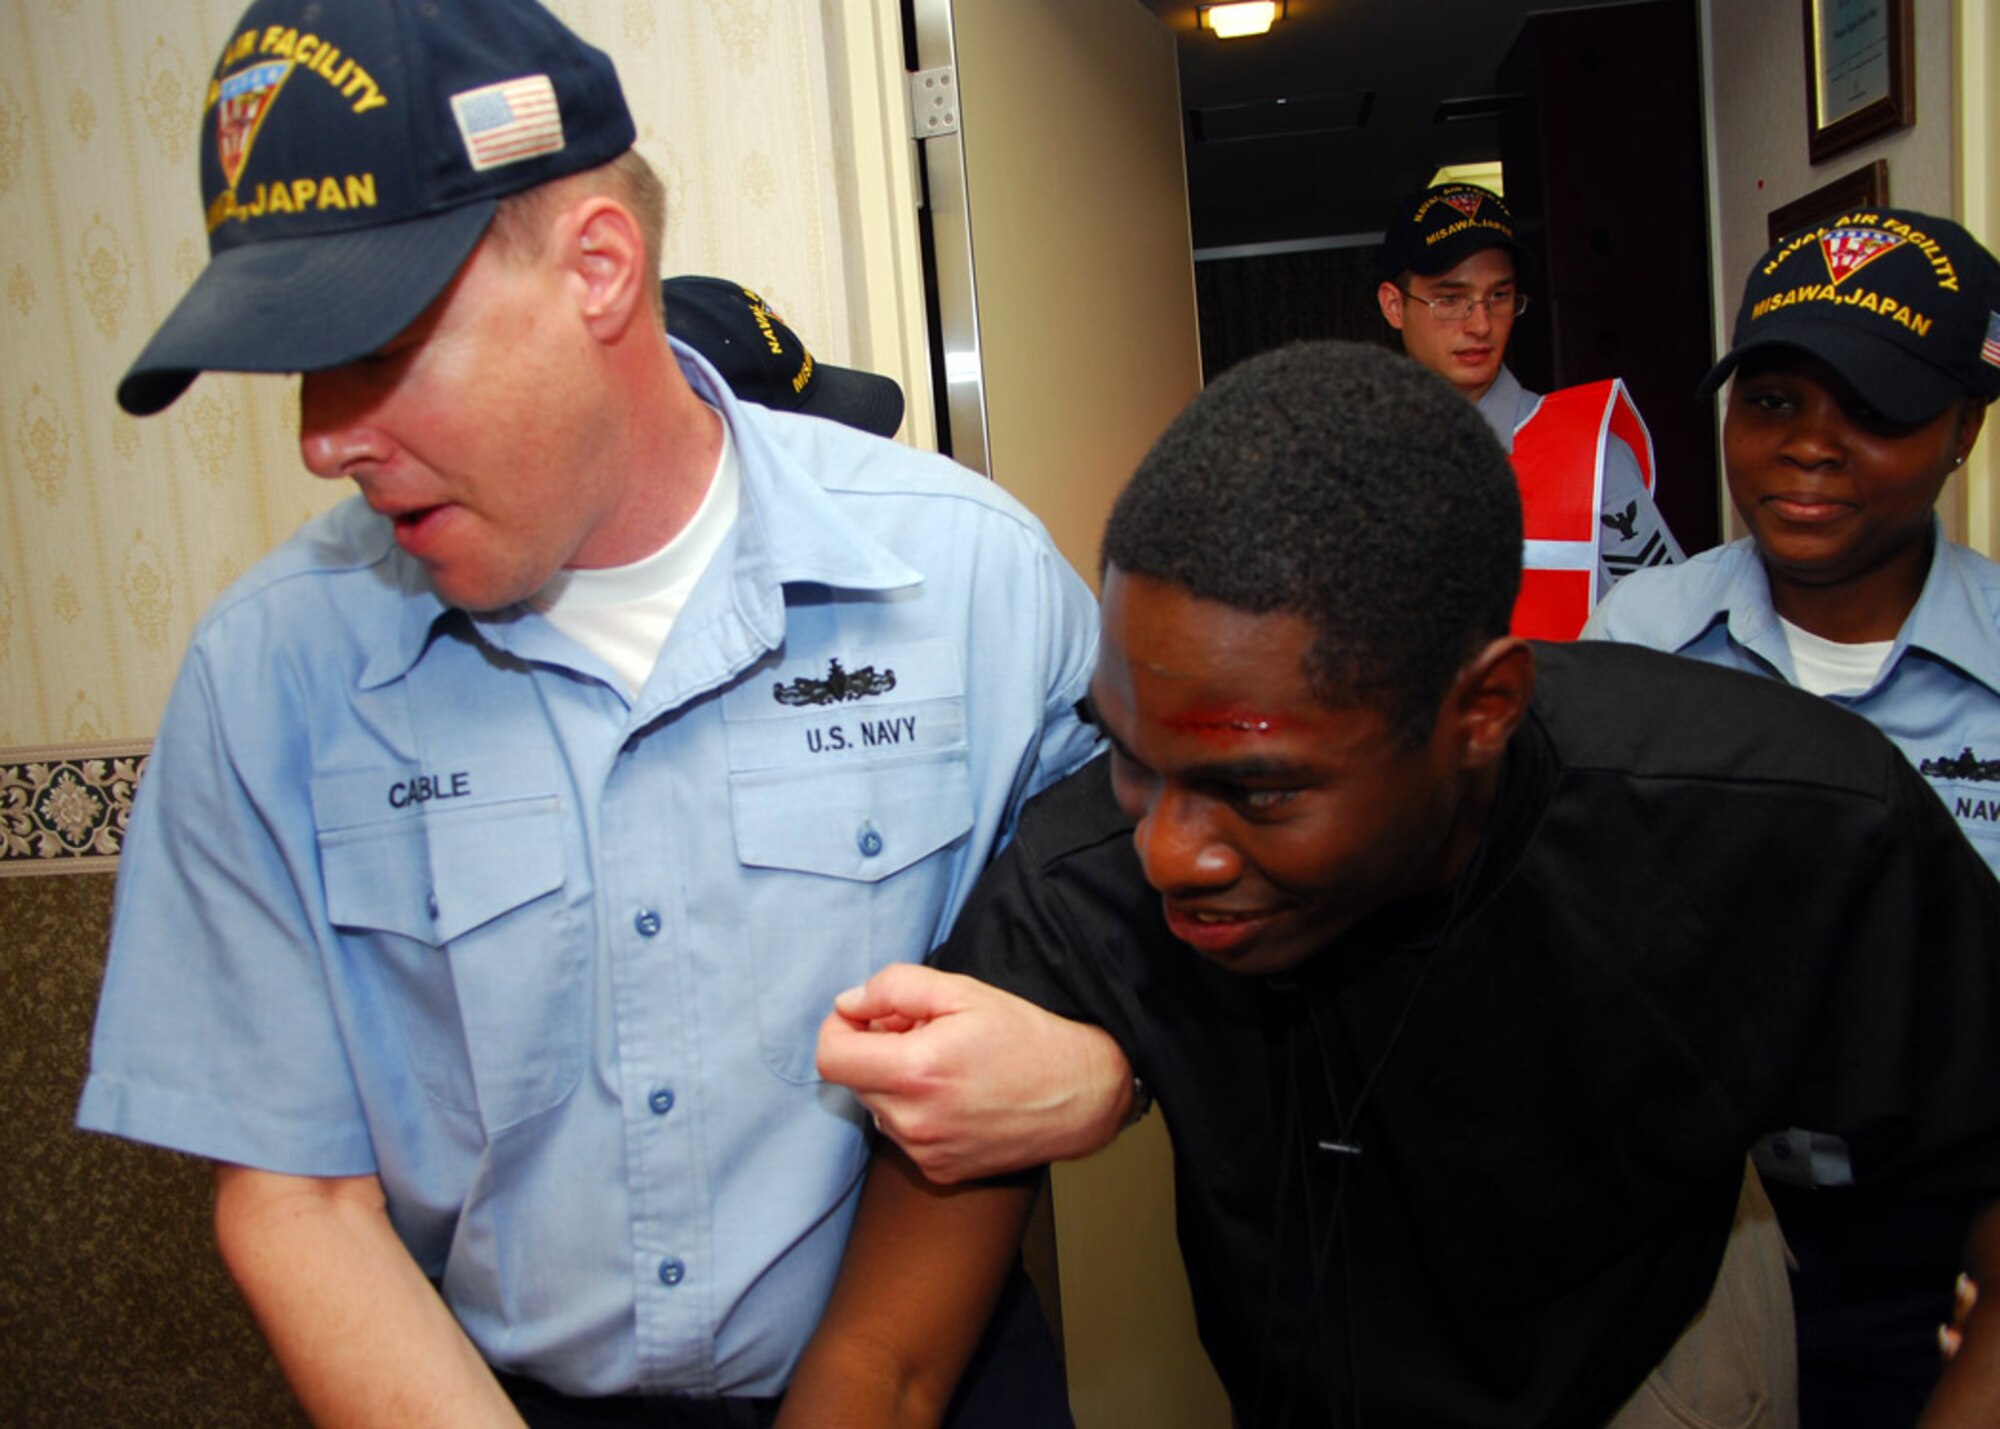 MISAWA AIR BASE, Japan -- Culinary Specialist 1st Class (SW) Randy Cable and Culinary Specialist 2nd (SW) Class Lakita Parker help evacuate a mock casualty from the Navy Gateway Inns and Suites at Naval Air Facility Misawa (NAFM) as Damage Controlman 1st Class (SW) Brandon Kahler, installation training team representative observes June 3, 2009. NAFM held an Installation Training Team/ Regional Training Team assessment drill to hone NAFM?s ability to respond to natural disasters such as earthquakes.  (U.S. Navy Photo by MC2 (SW) Matthew M. Bradley.)